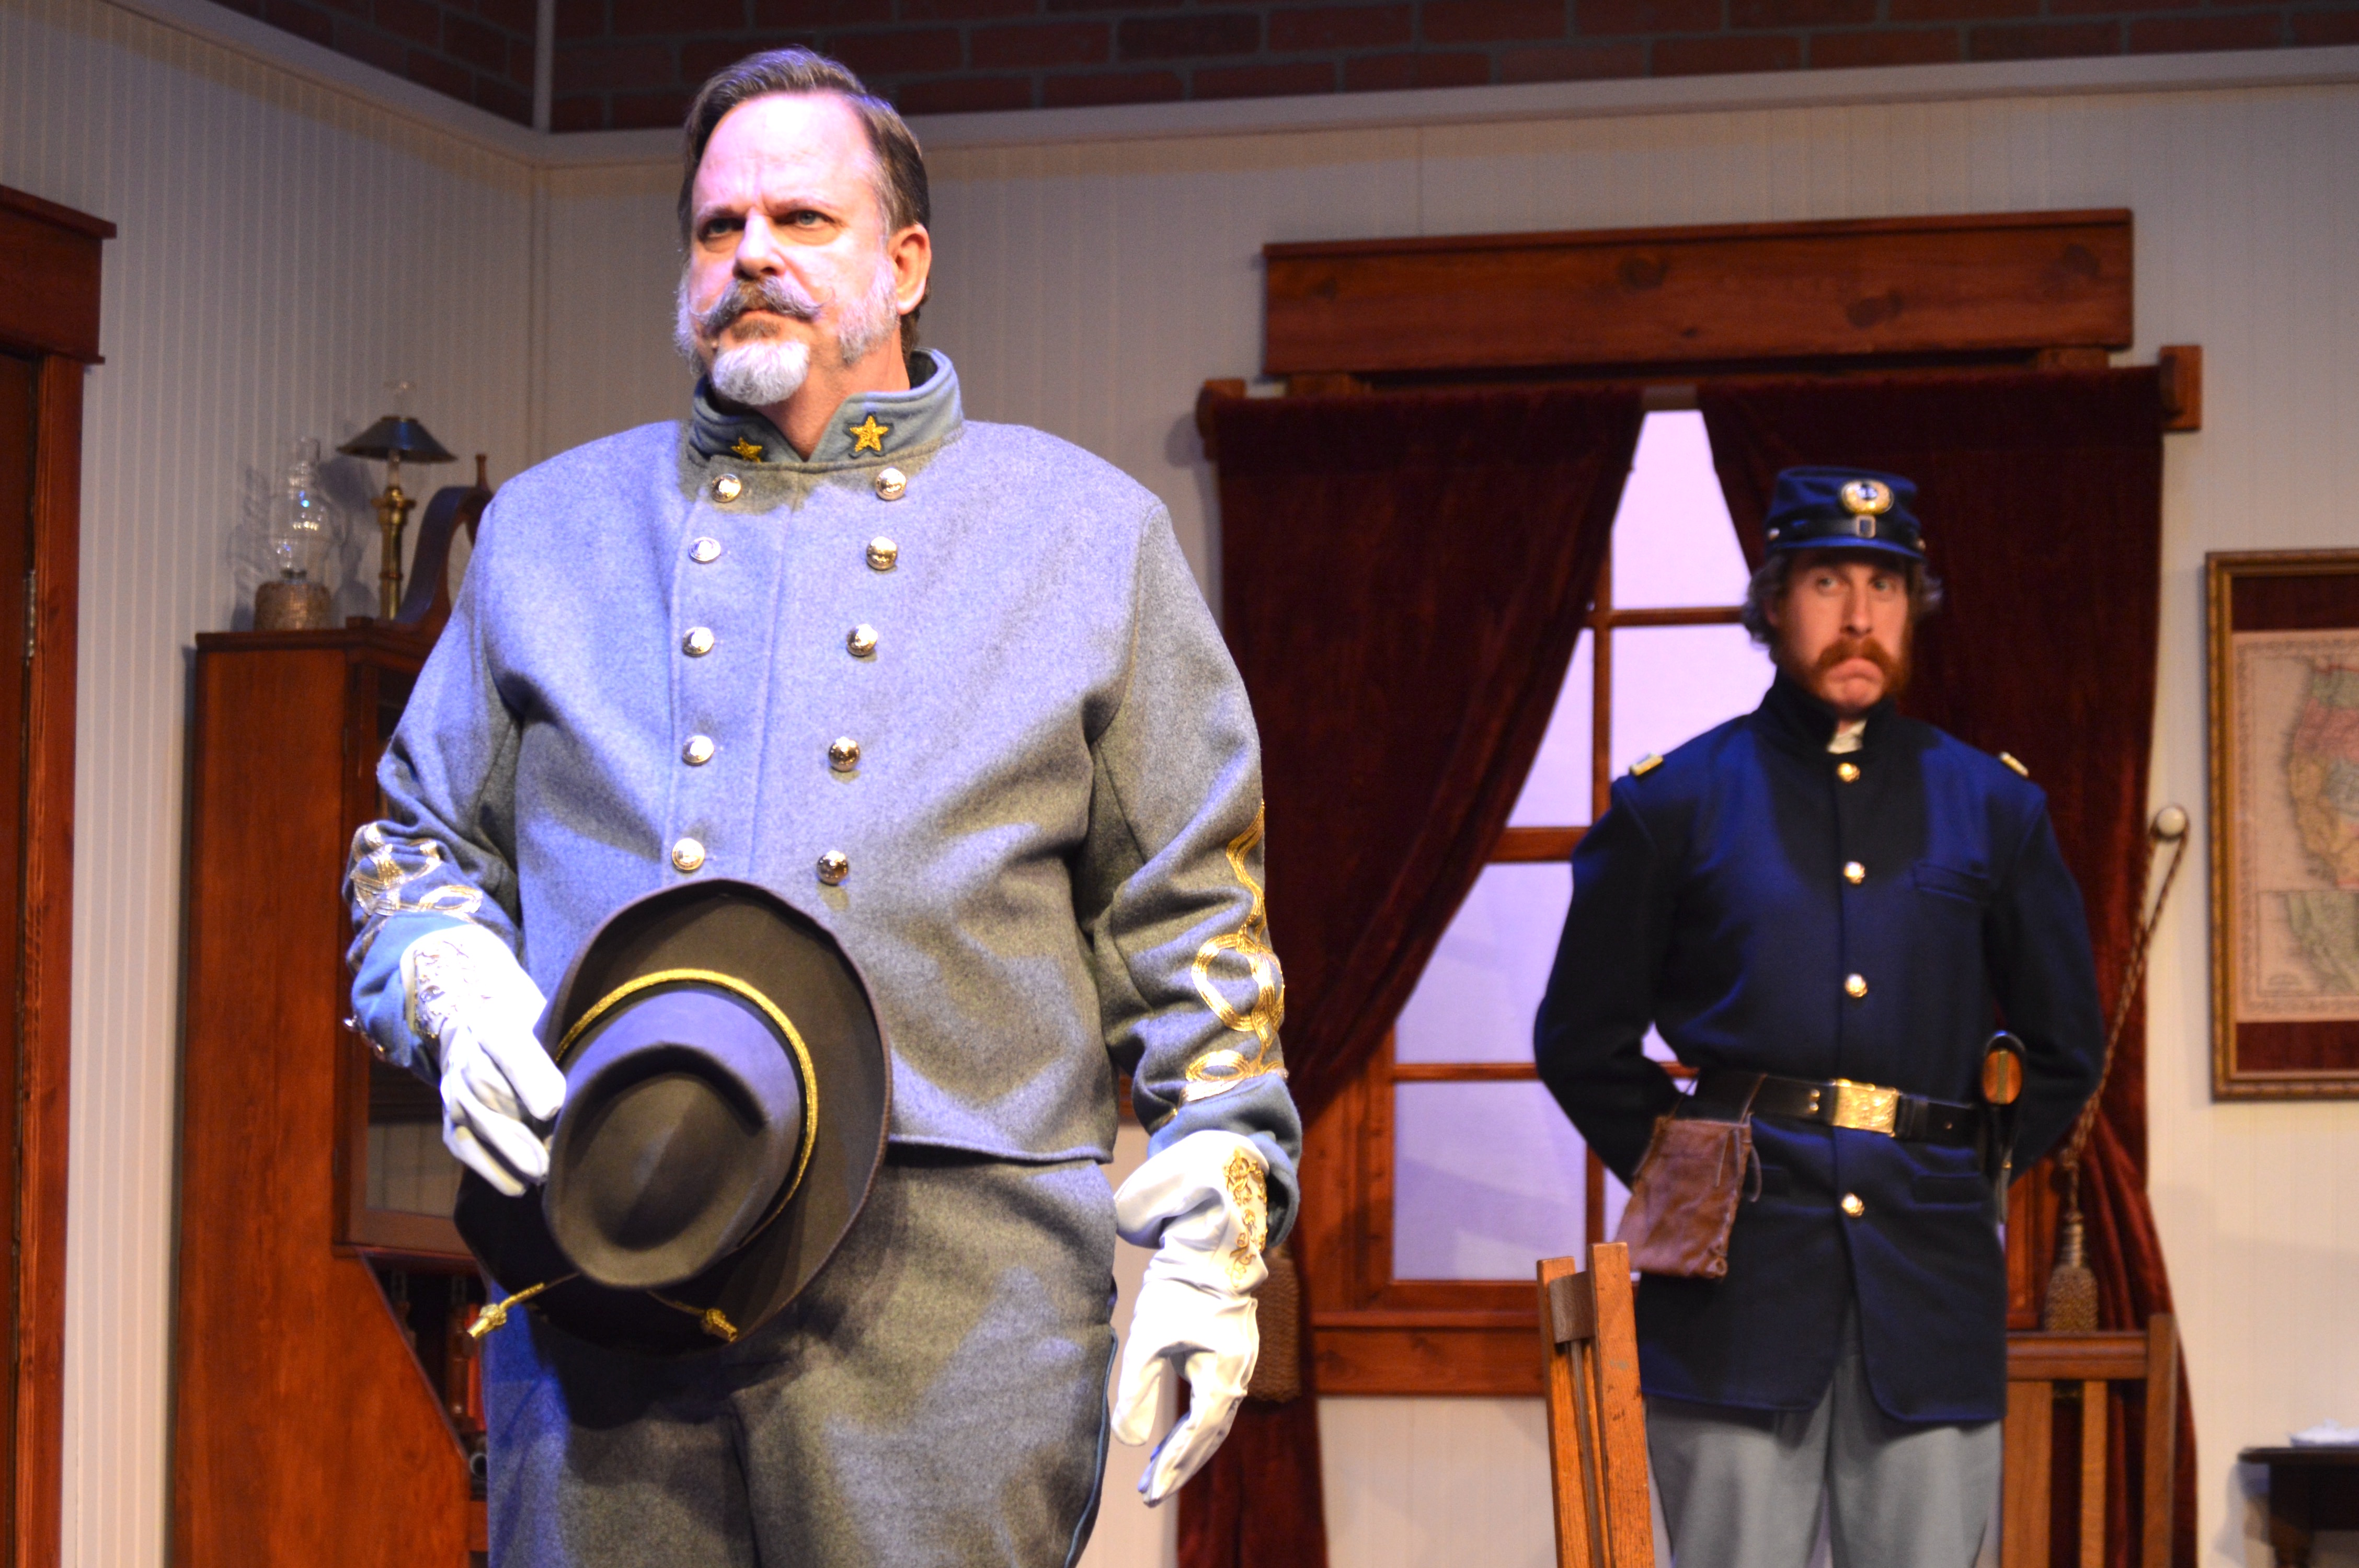 From right, Mark Fox as Lt. Kelly in the Union Army and Dave Tucker as Major Cary from the Confederate Army.